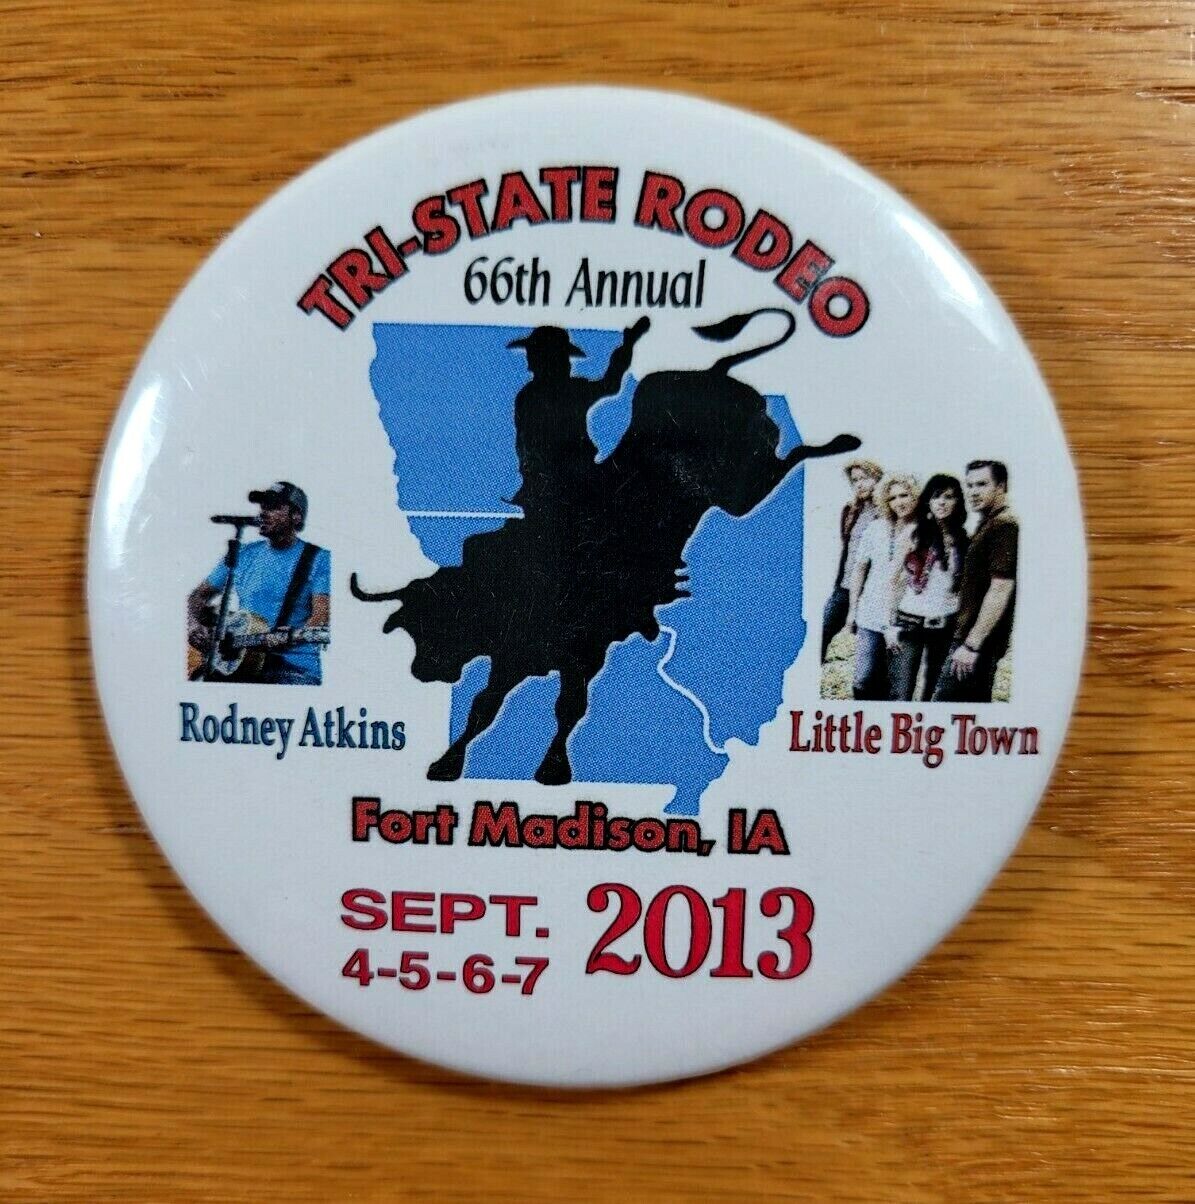 TRI-STATE RODEO 2013 Fort Madison, Iowa Little Big Town Rodney Atkins Pin Button